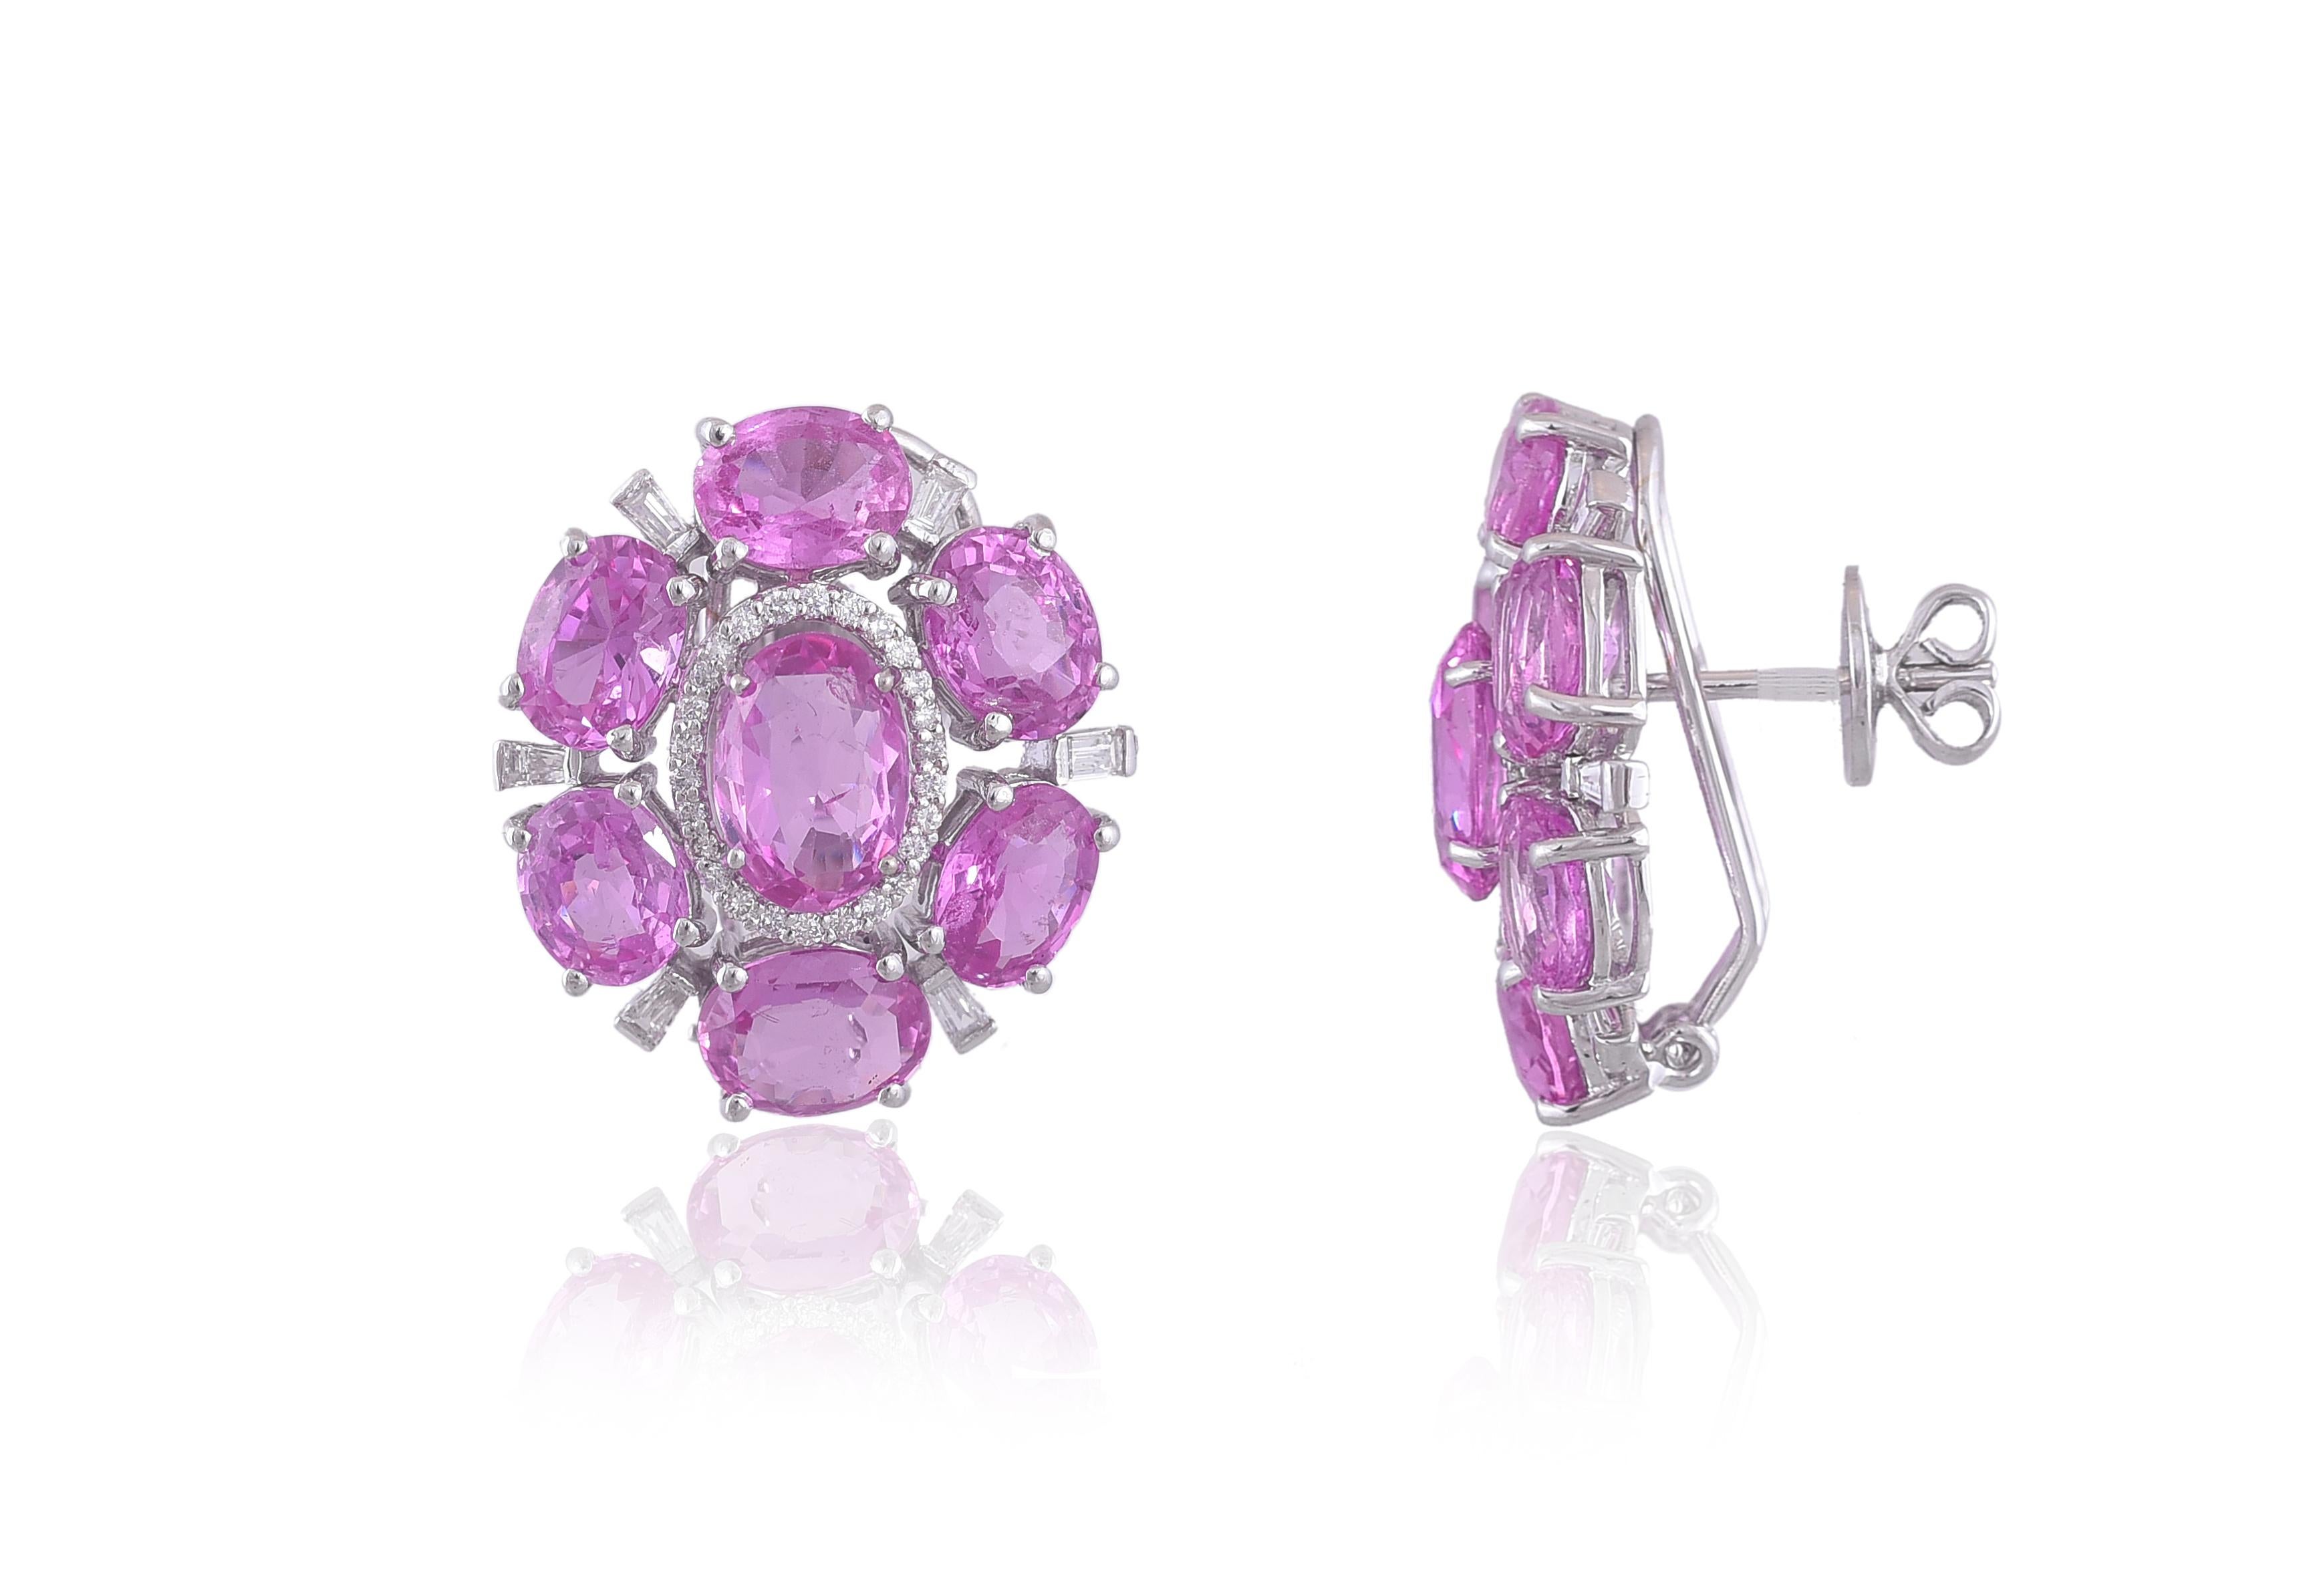 A very chic pair of Pink Sapphire Stud Earrings set in 18K gold and Diamonds. The weight of the pink sapphires is 21.83 carats. The sapphires are natural, from Madagascar. The weight of the diamonds is 0.75 carats. The earrings have a clip back and